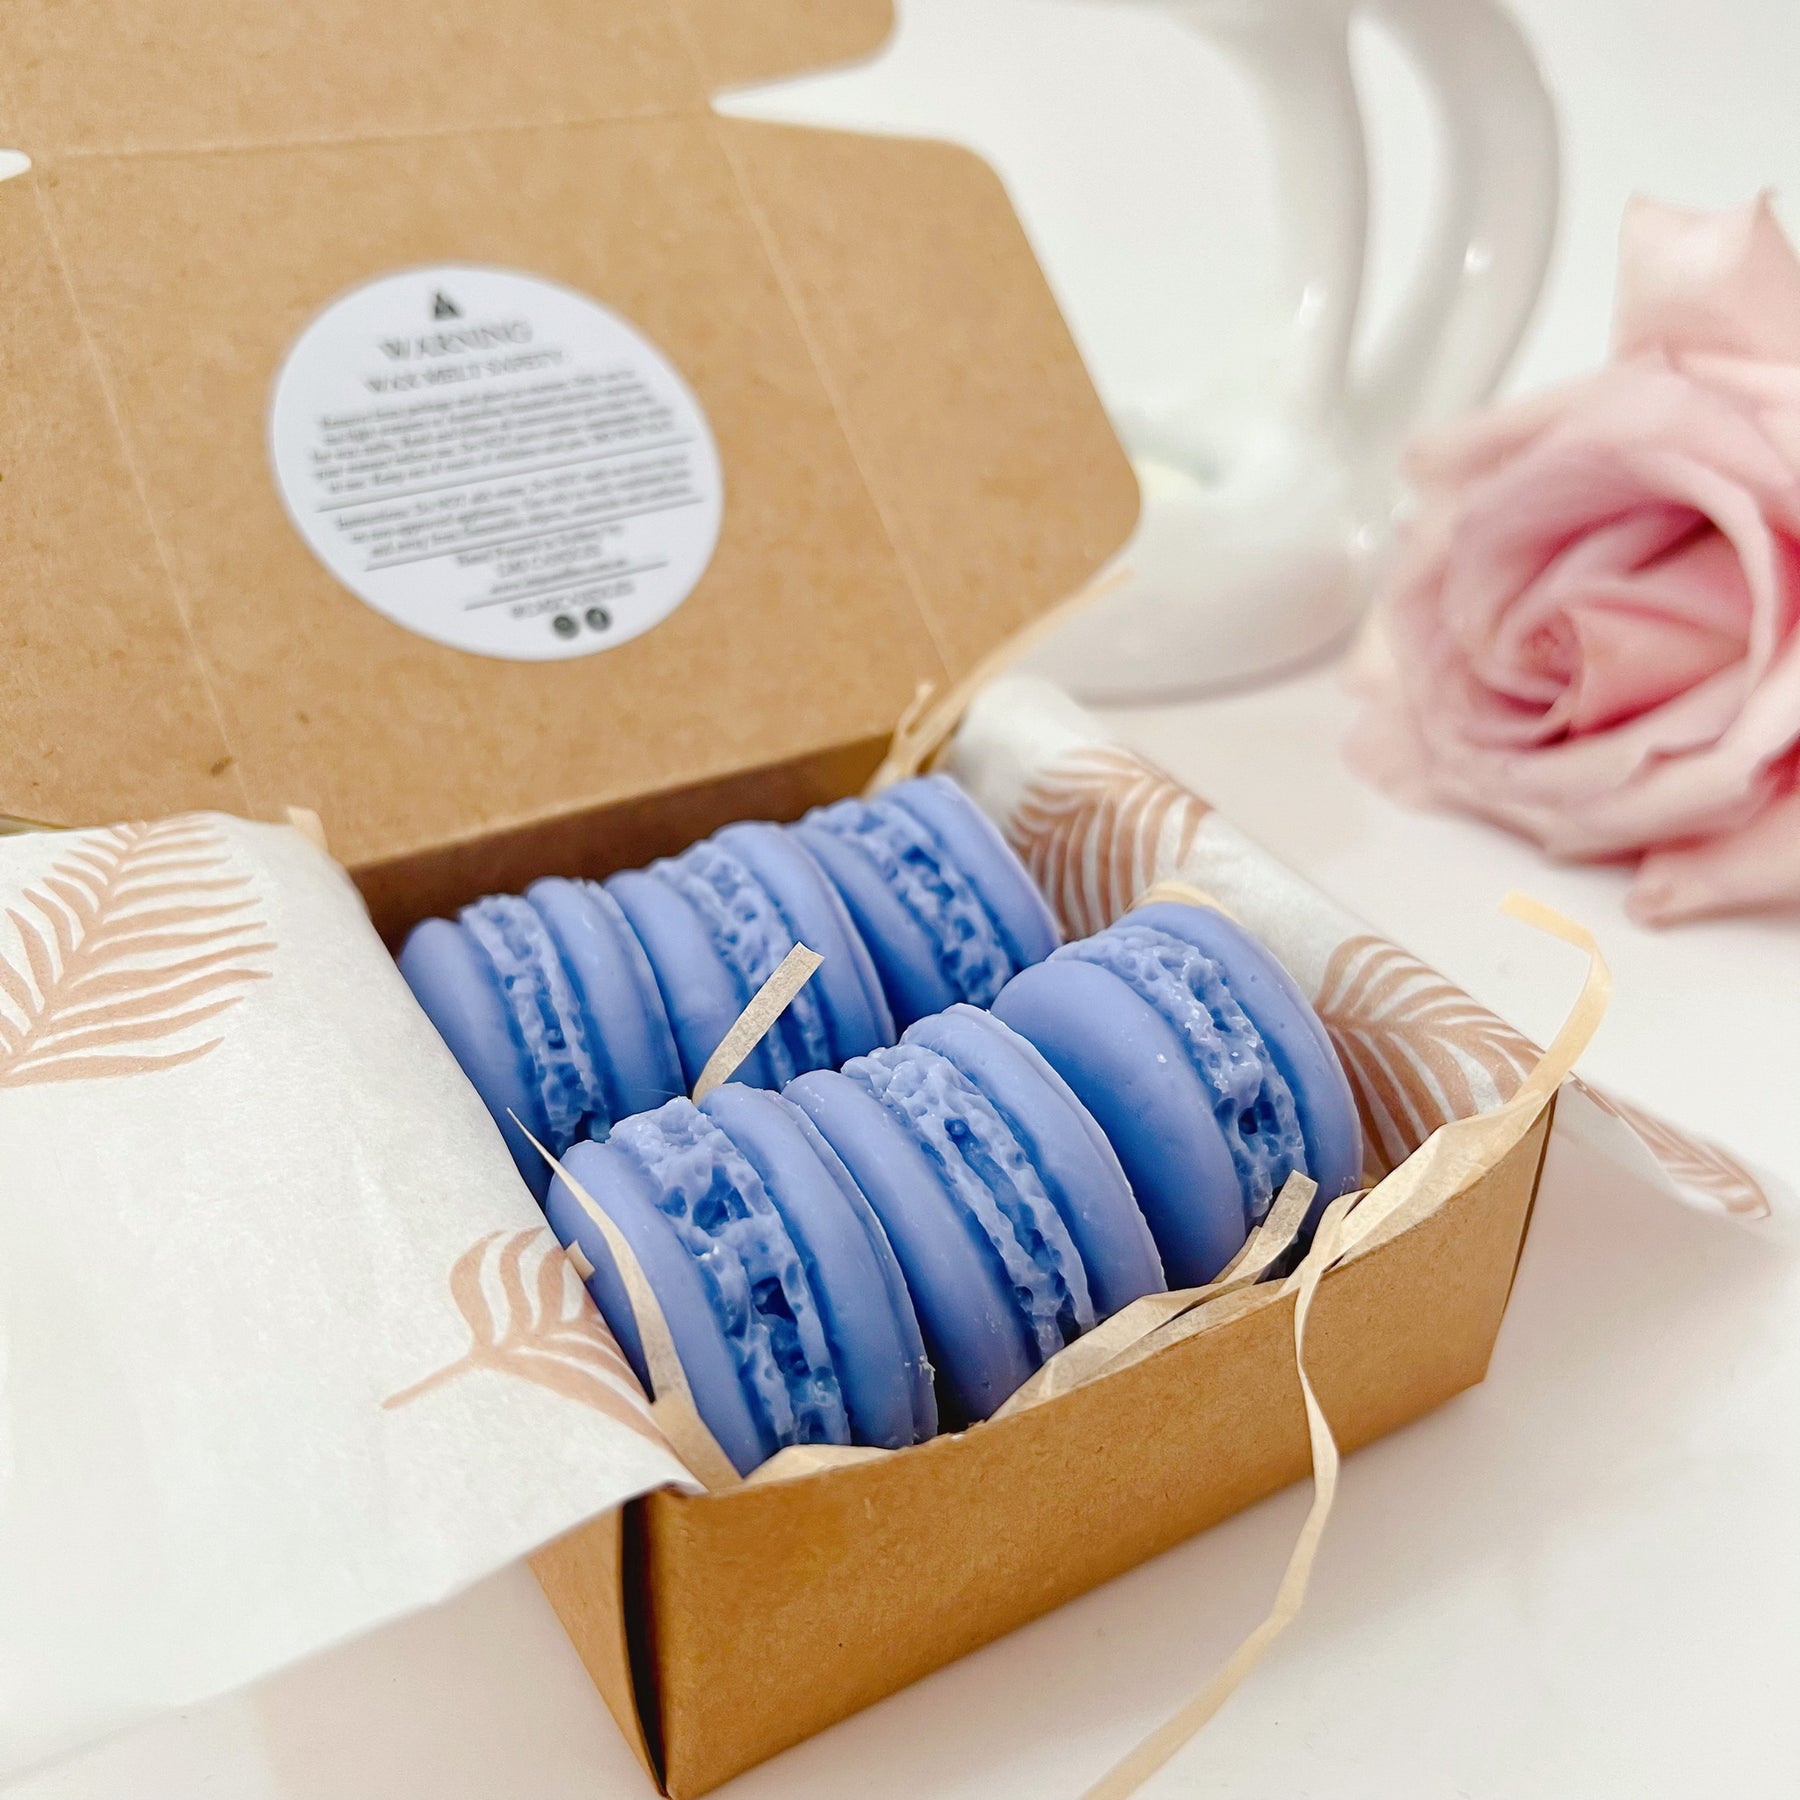 Six colorful macaron-shaped soy wax melts from LMJ Candles artistically arranged on ceramic warmer and cardboard box, showcasing eco-friendly and vegan features.